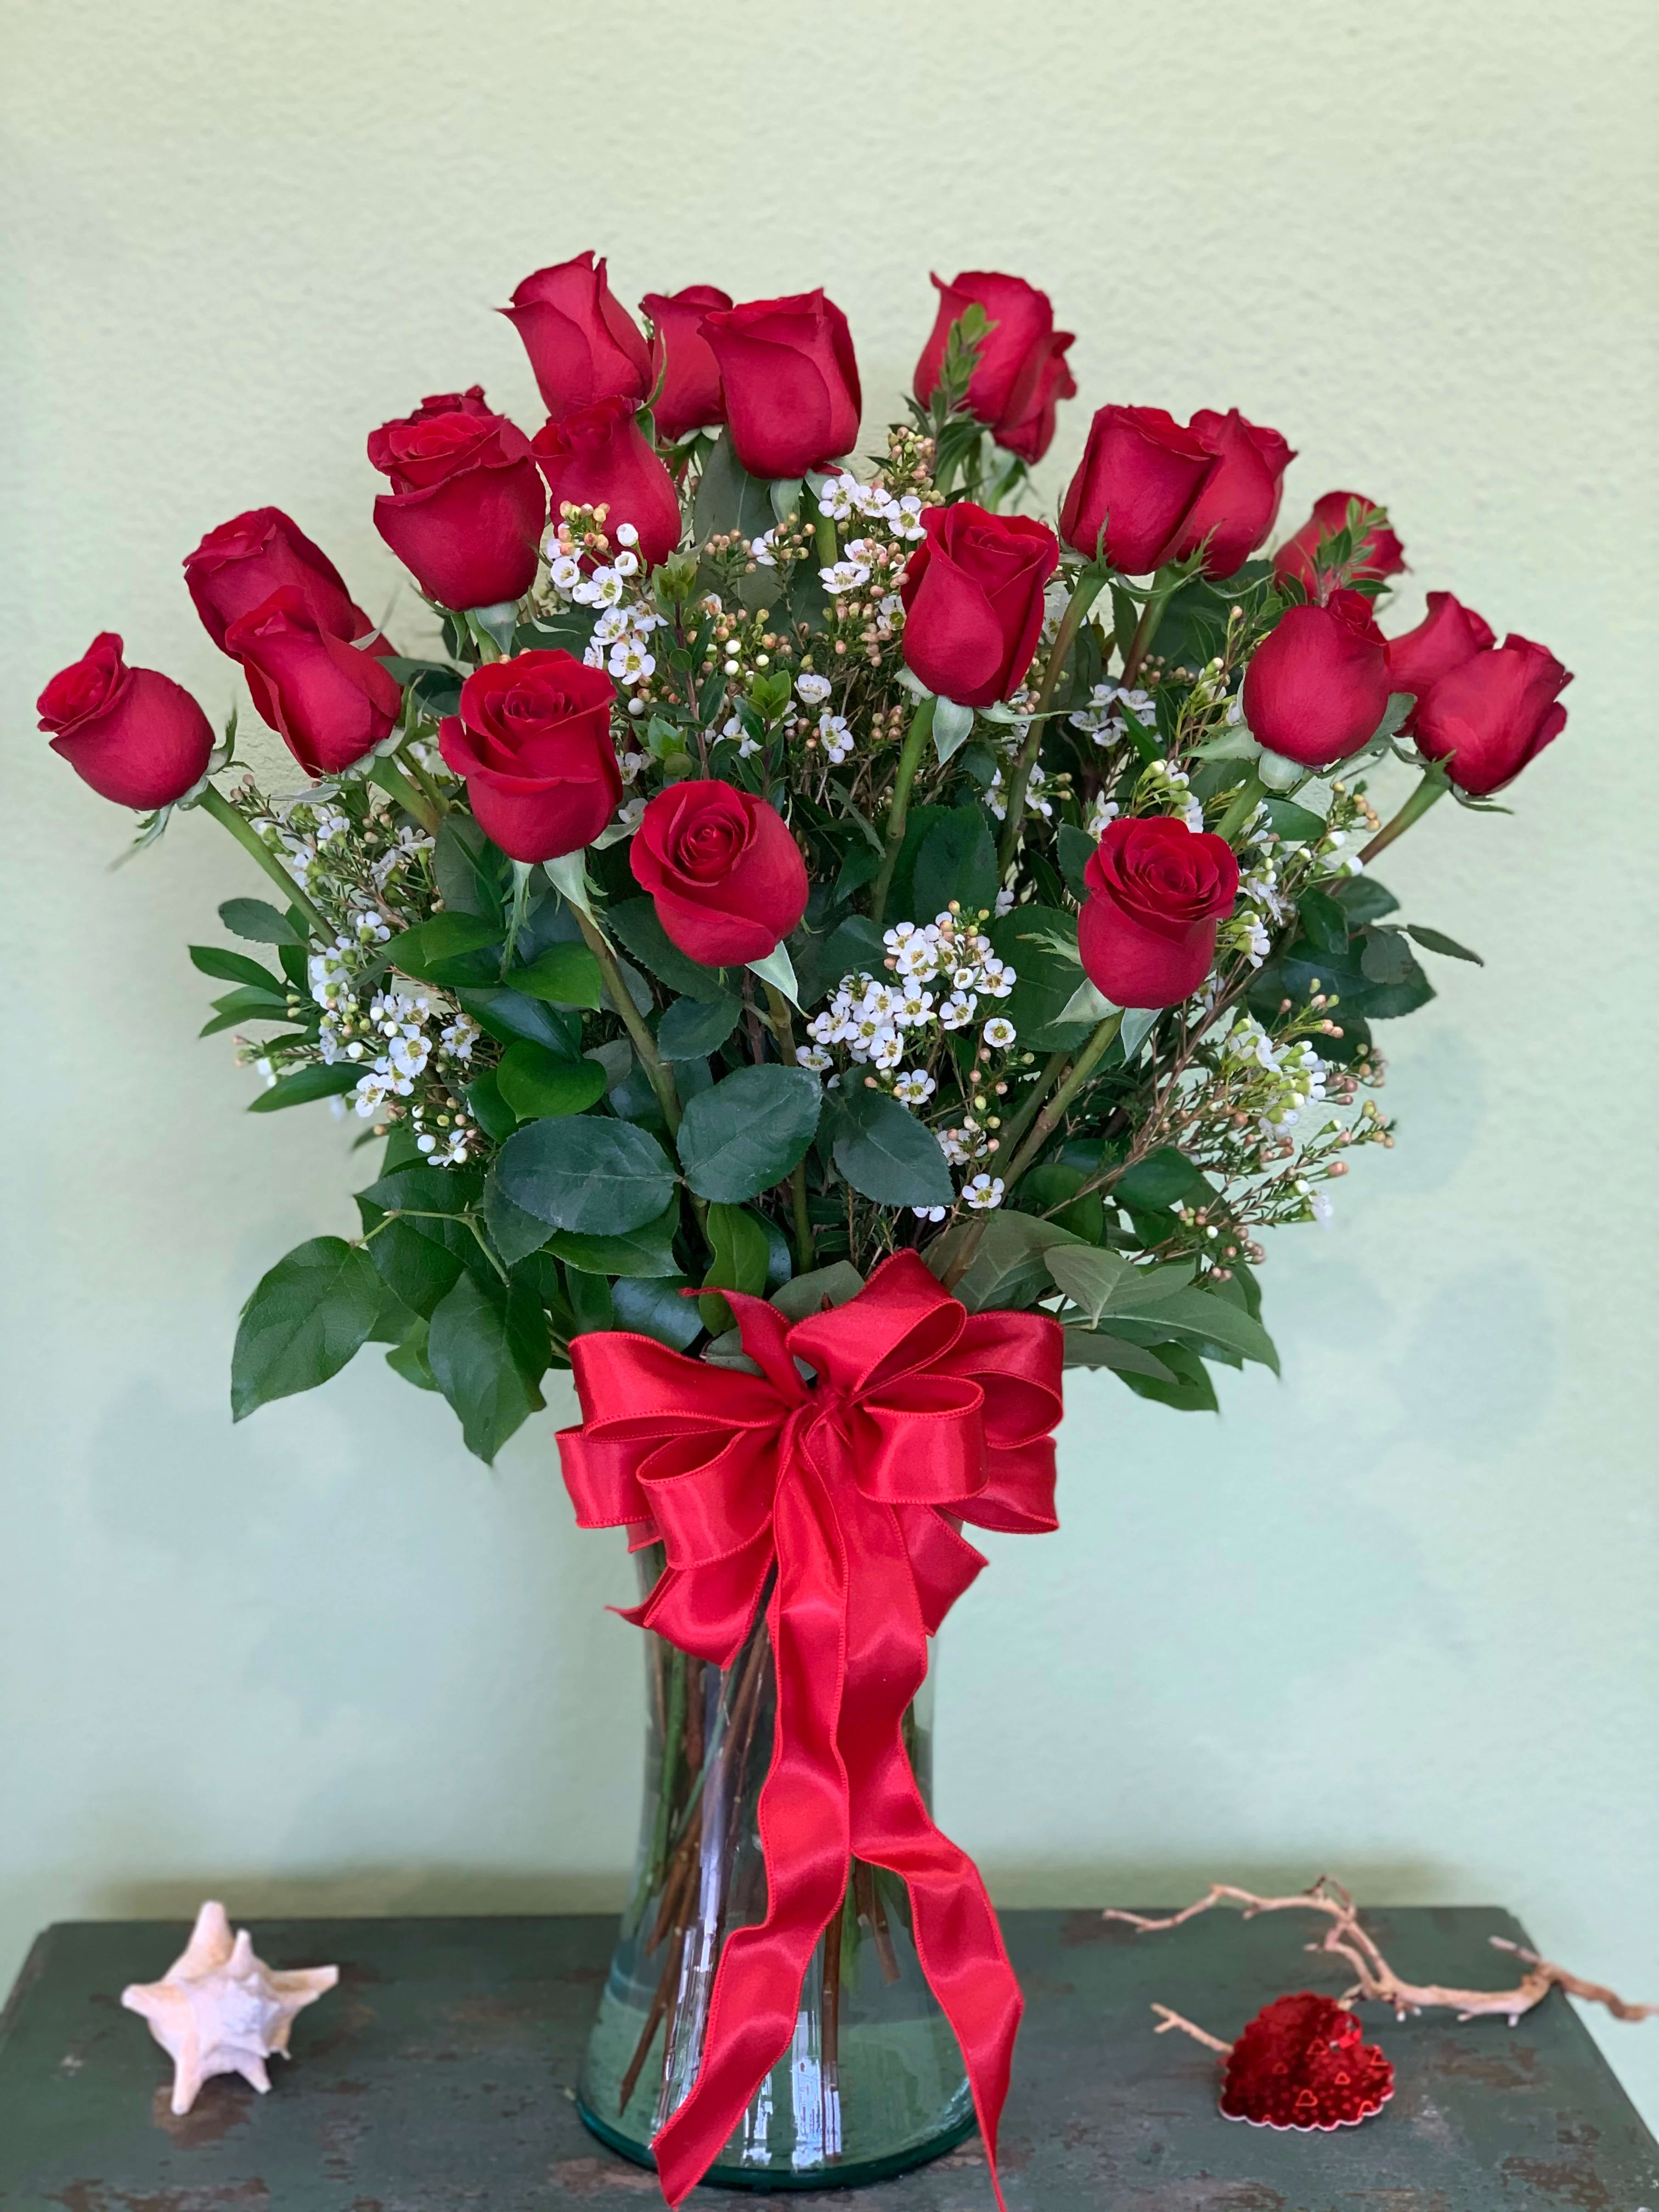 Classic Two Dozen Premium Roses - Two dozen of the finest, premium long stemmed roses artfully arranged in a tall, showy vase.. COLOR WILL VARY!  PLEASE NOTE YOUR PREFRENCE, otherwise our designers will choose the freshest blooms available.  When you want to make a statement and only the finest will do! 